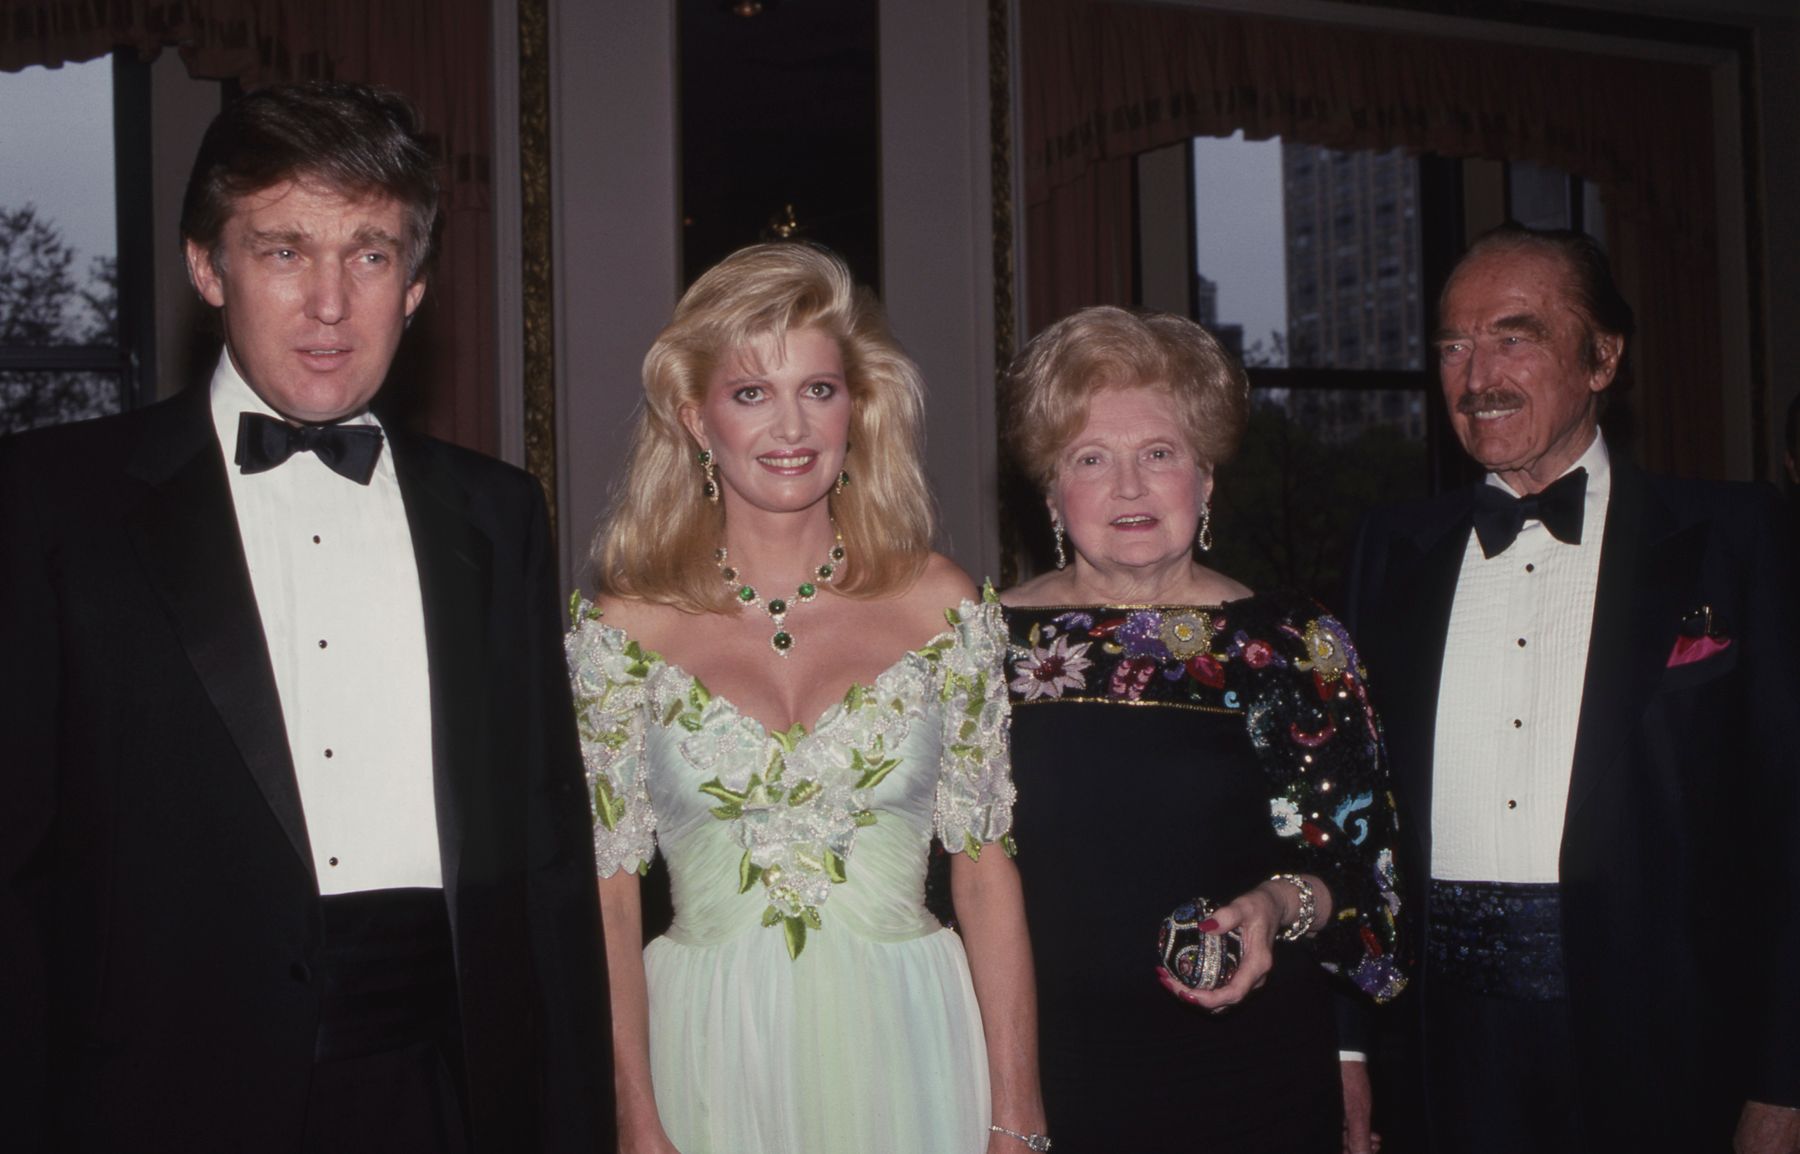 Donald Trump, his ex-wife Ivana Trump, Mary Anne Trump MacLeod and Fred Trump attend the Police Athletic League dinner honoring Donald Trump at the Plaza Hotel in May 1989 in New York. | Source: Getty Images